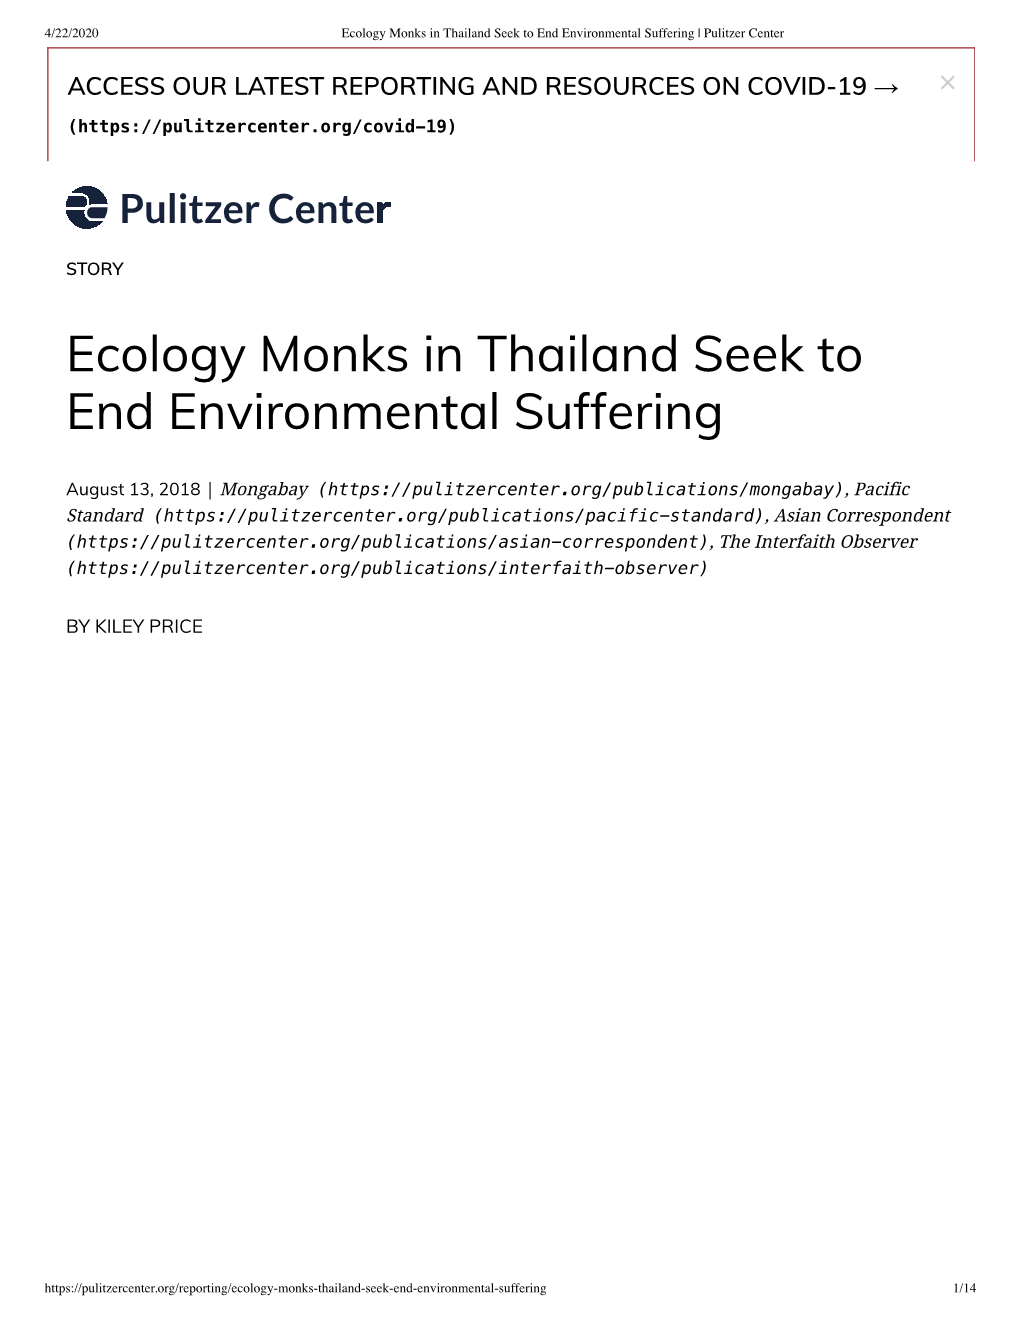 Ecology Monks in Thailand Seek to End Environmental Suffering | Pulitzer Center